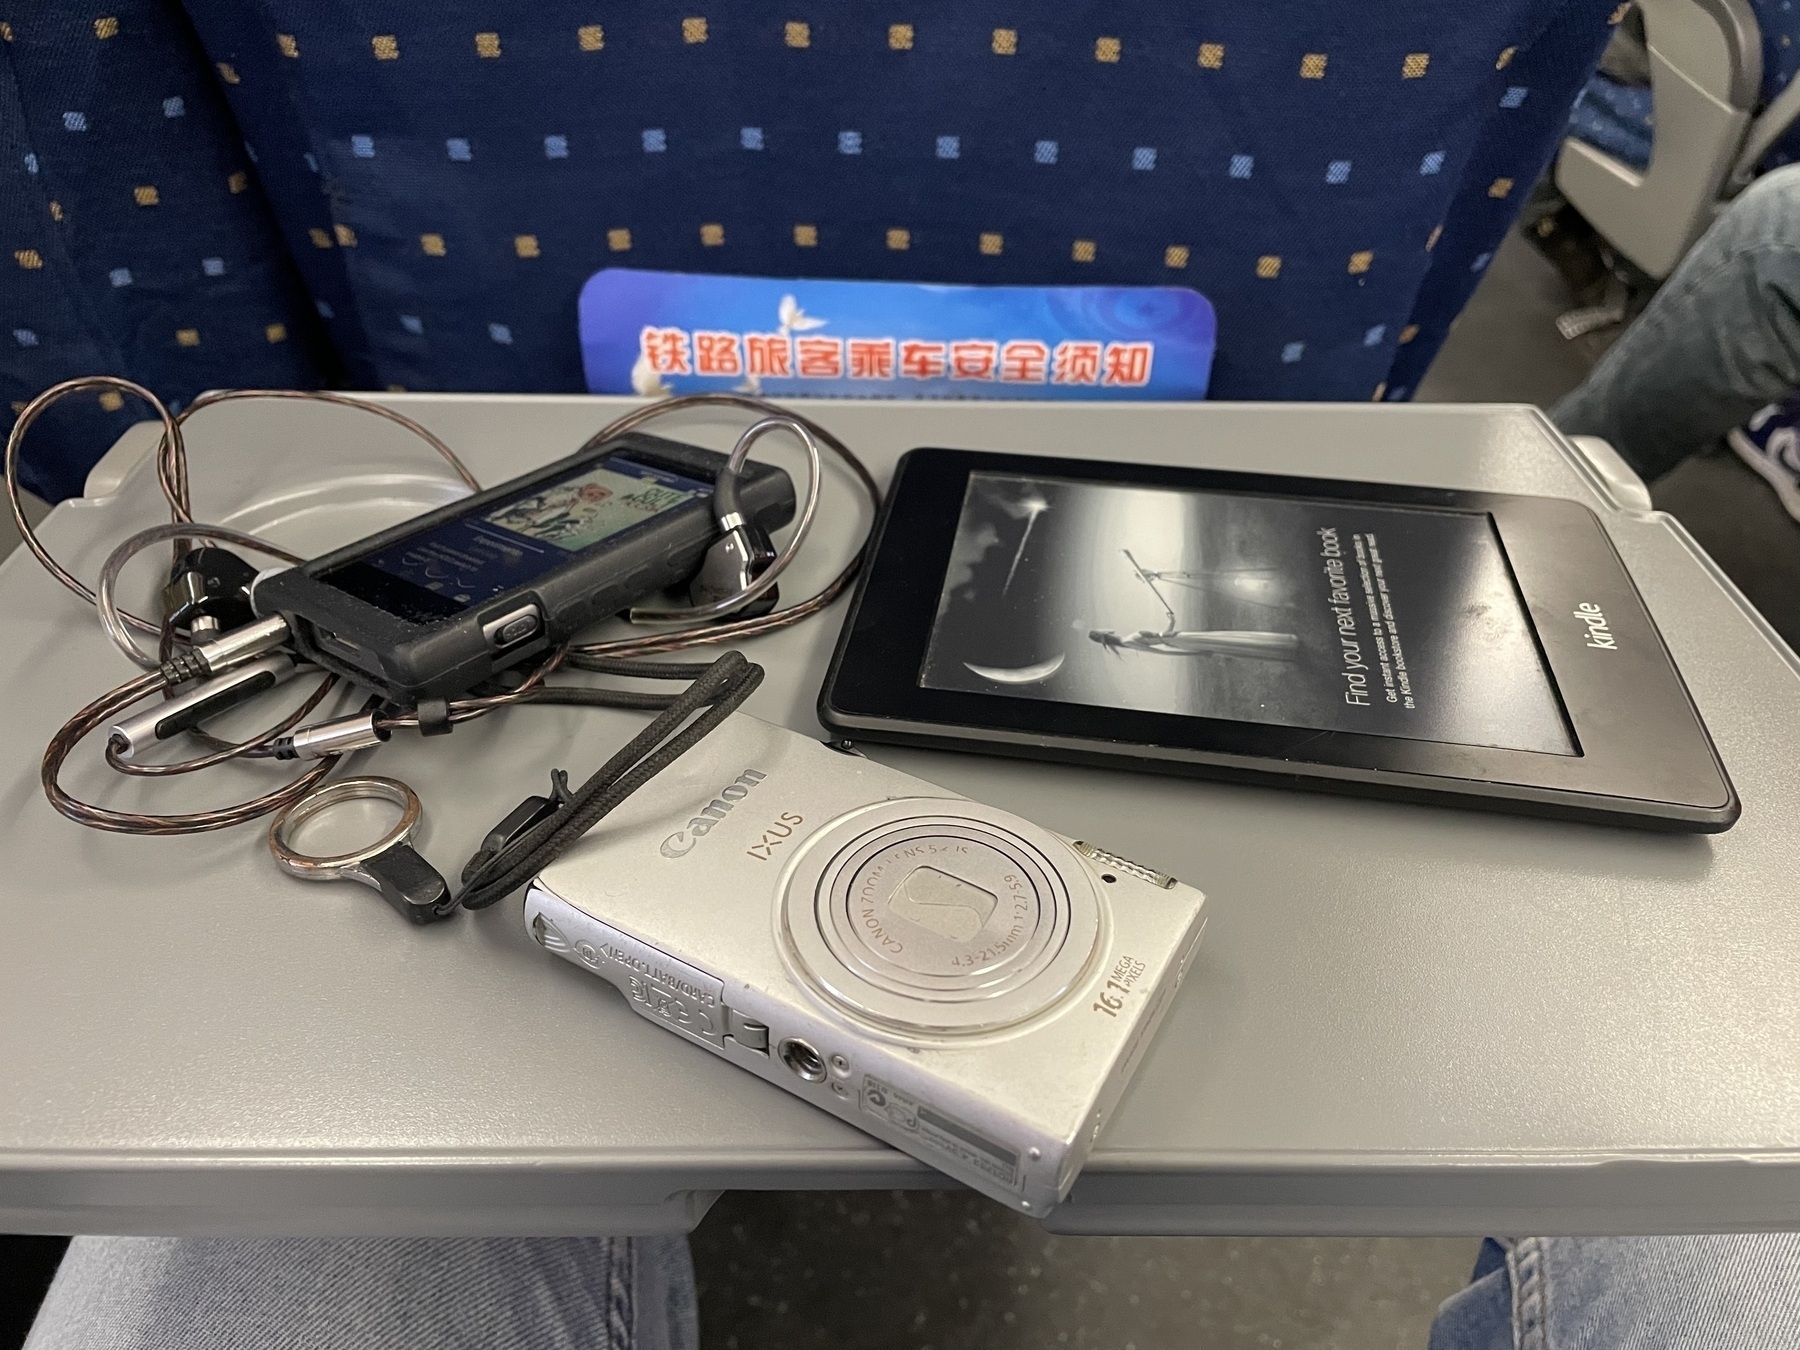 photo of a Sony mp3 player, old Canon Ixus camera and a Kindle on a fold down train table